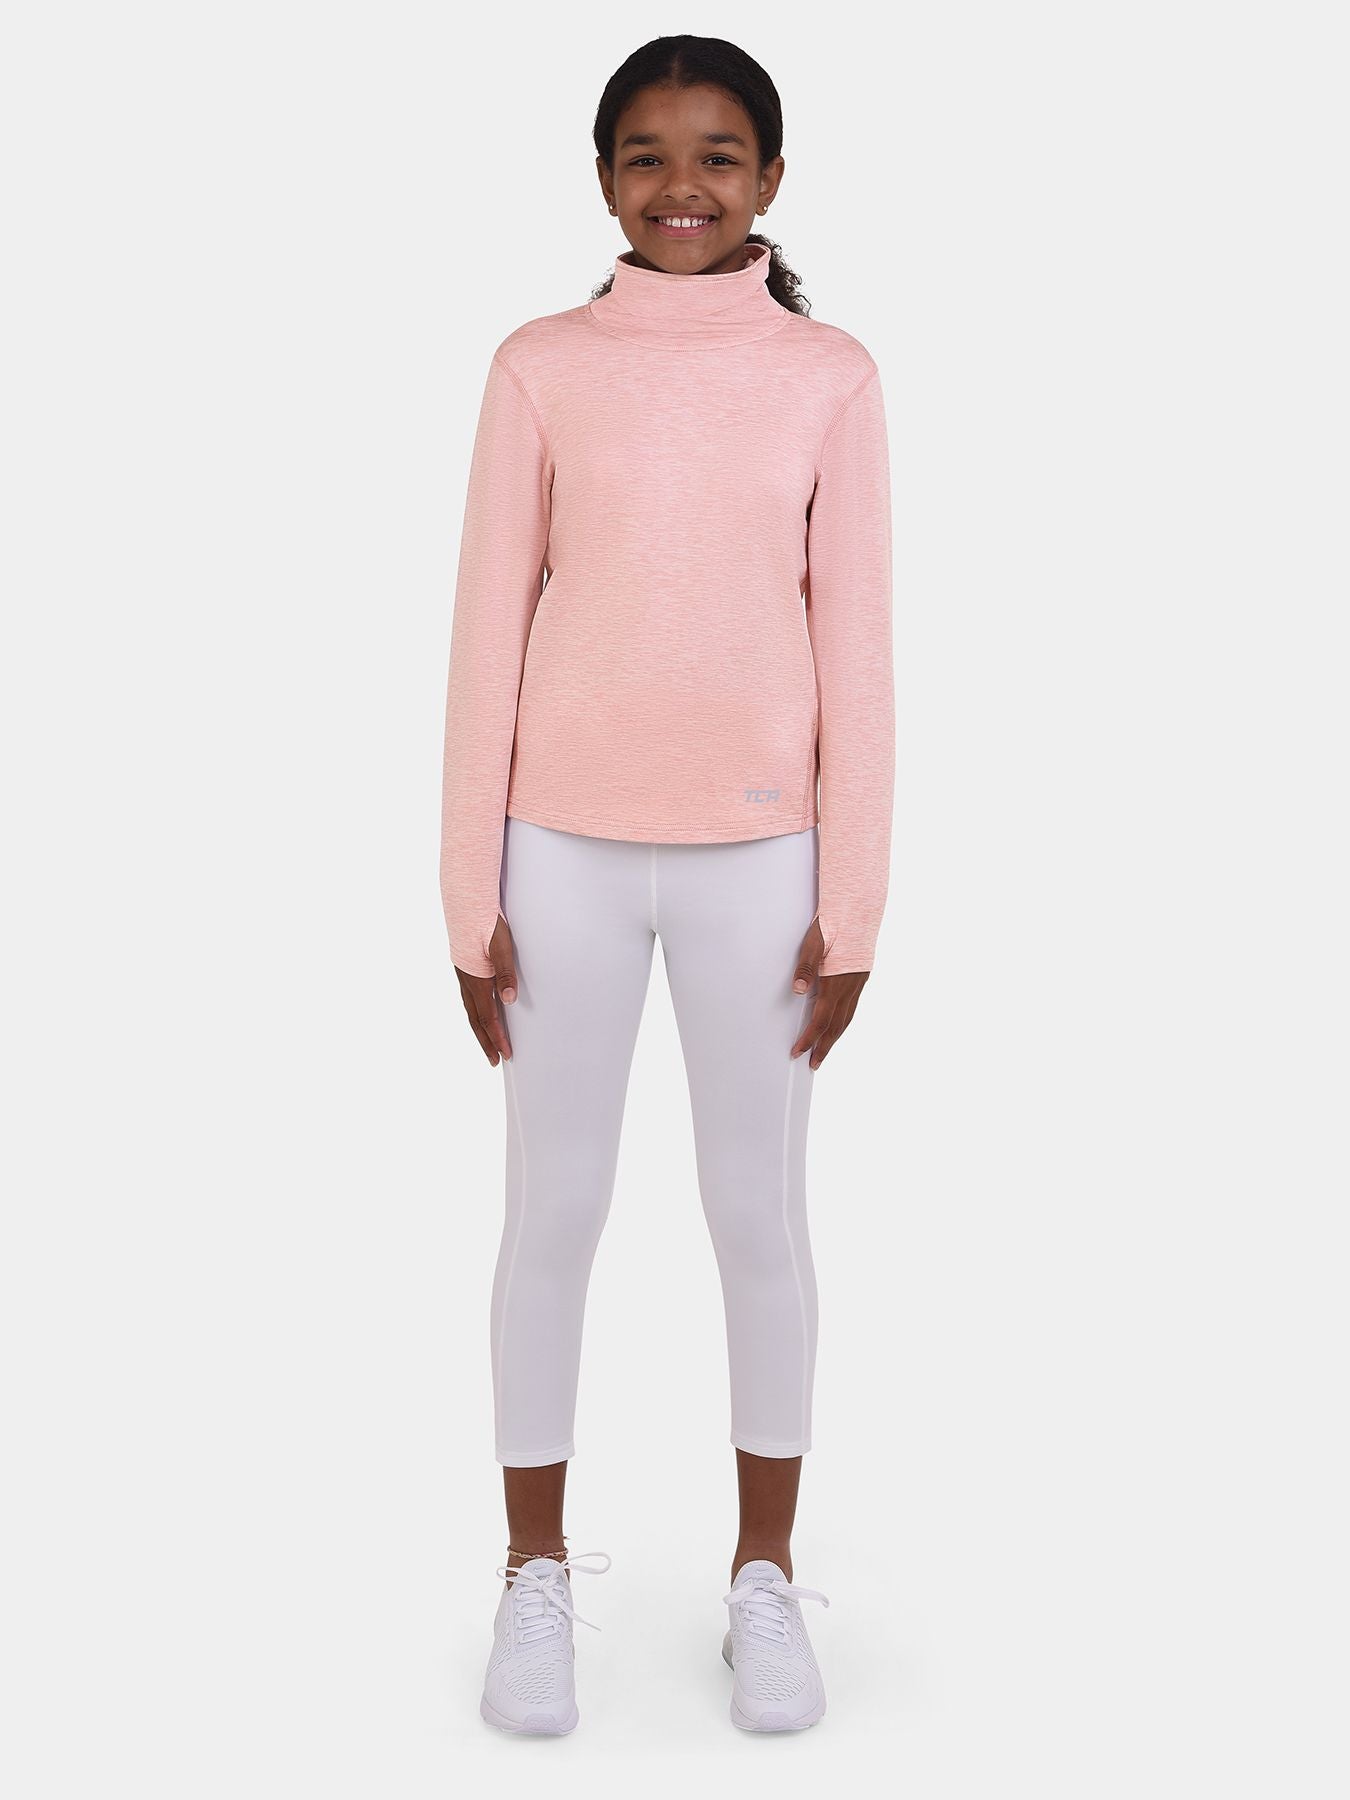 Warm-Up Thermal Long Sleeve Funnel Neck Top For Girls With Brushed Inner Fabric, Thumbholes & Reflective Strips